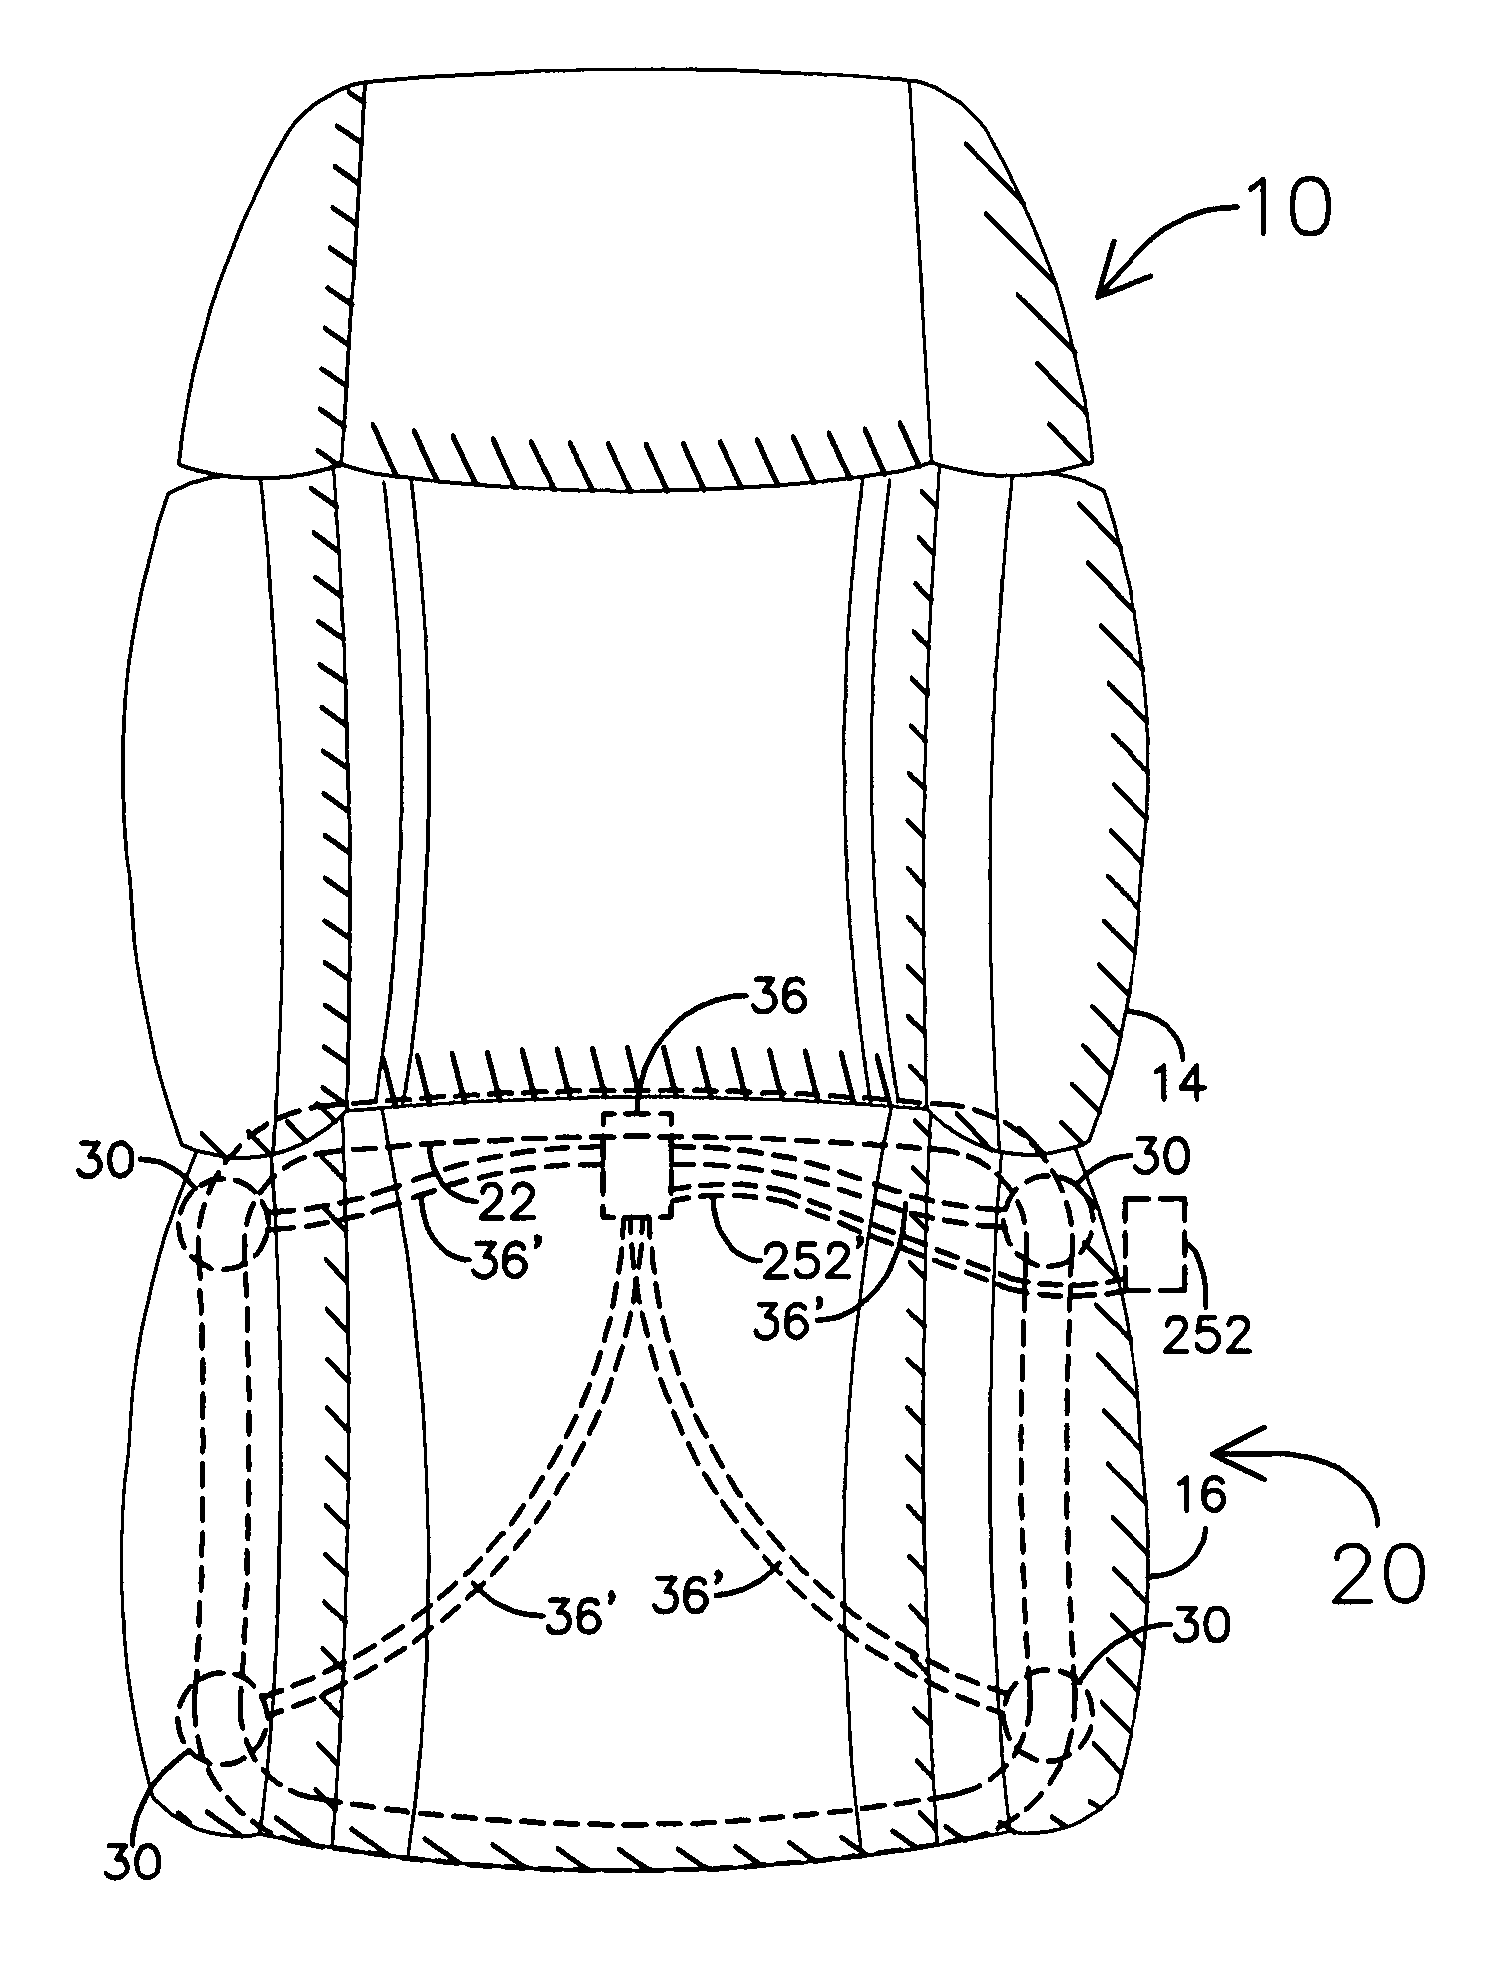 Load cell and seat occupant weight sensing system